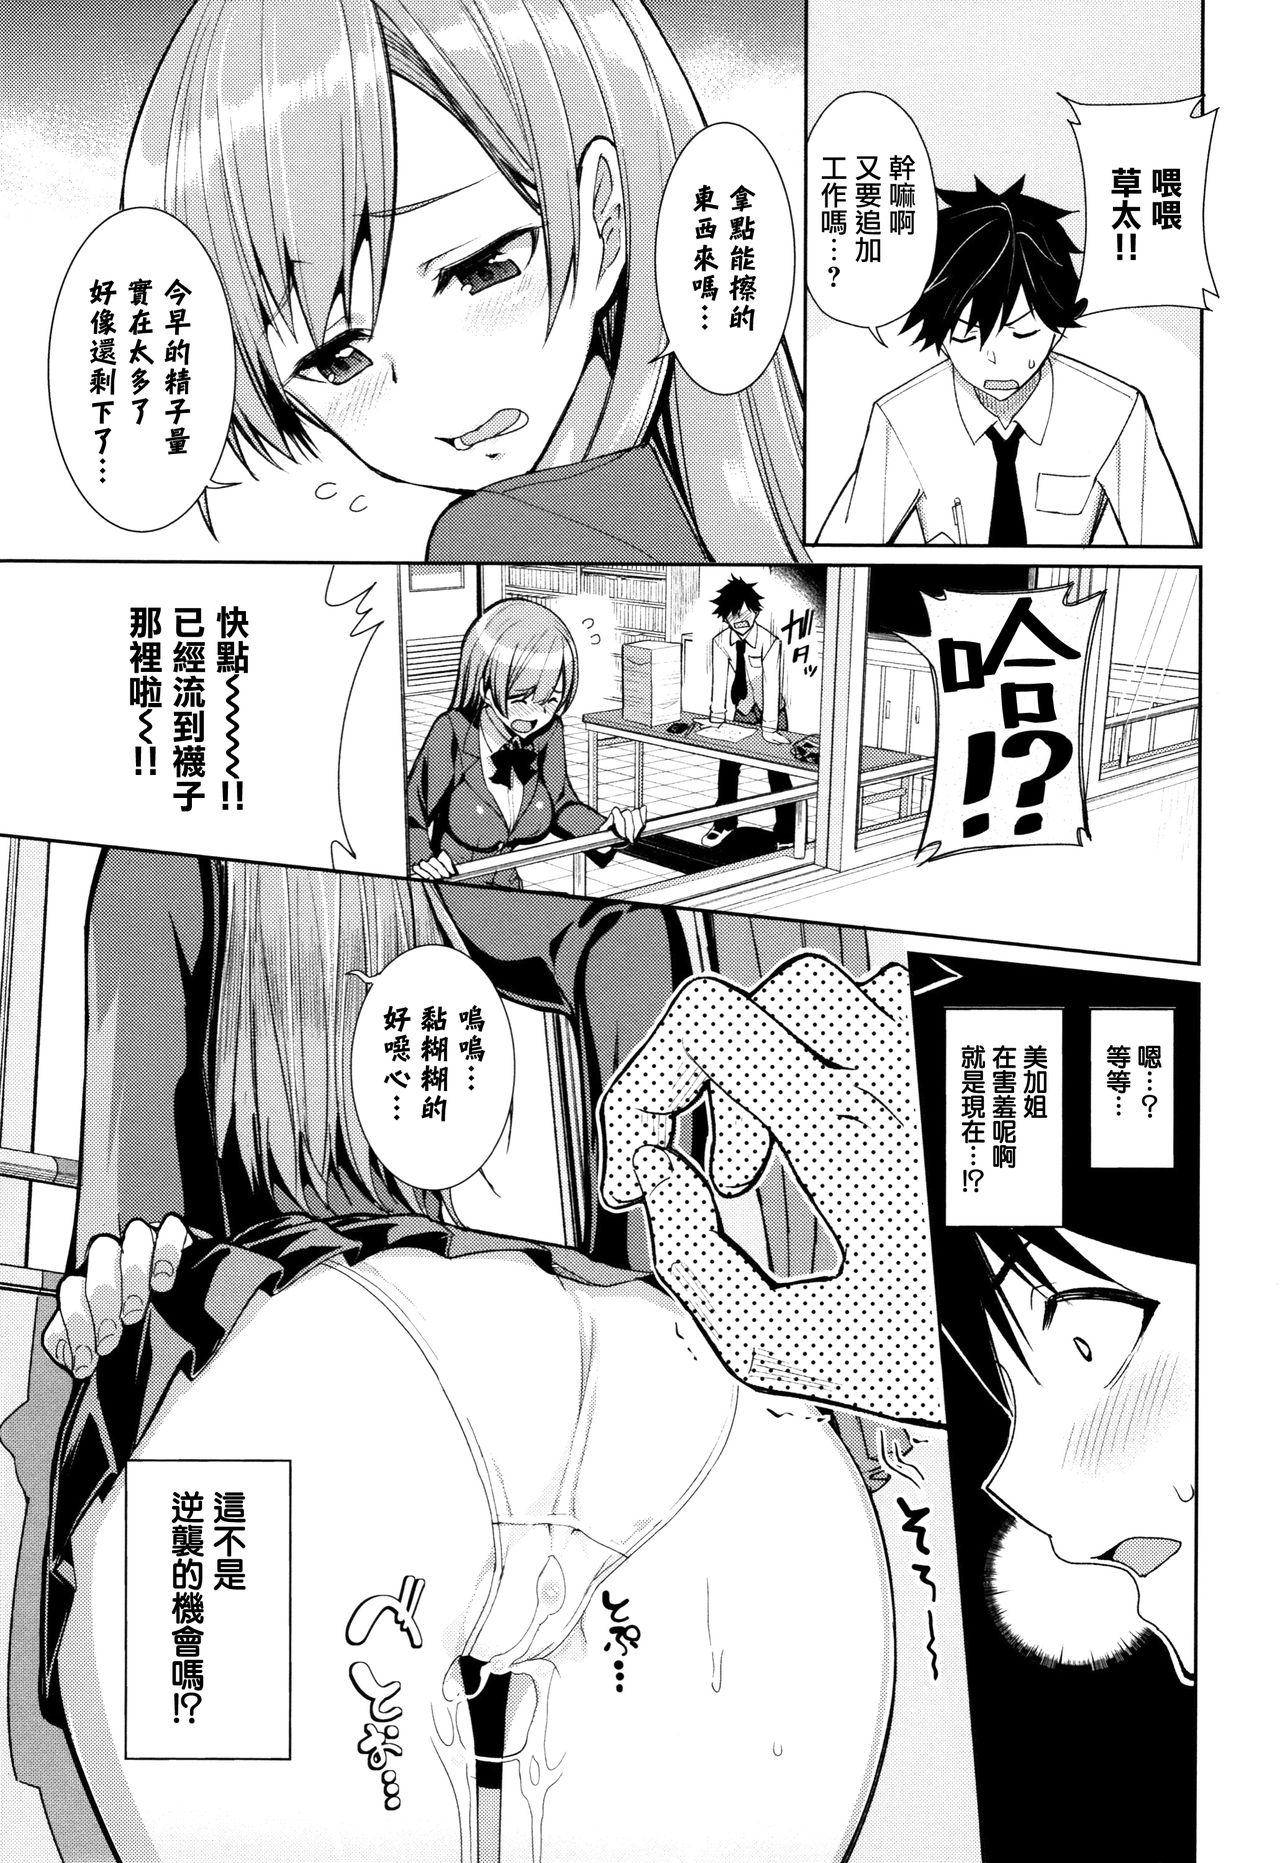 Lolicon milking Ch. 1-5 Free Blow Job - Page 10